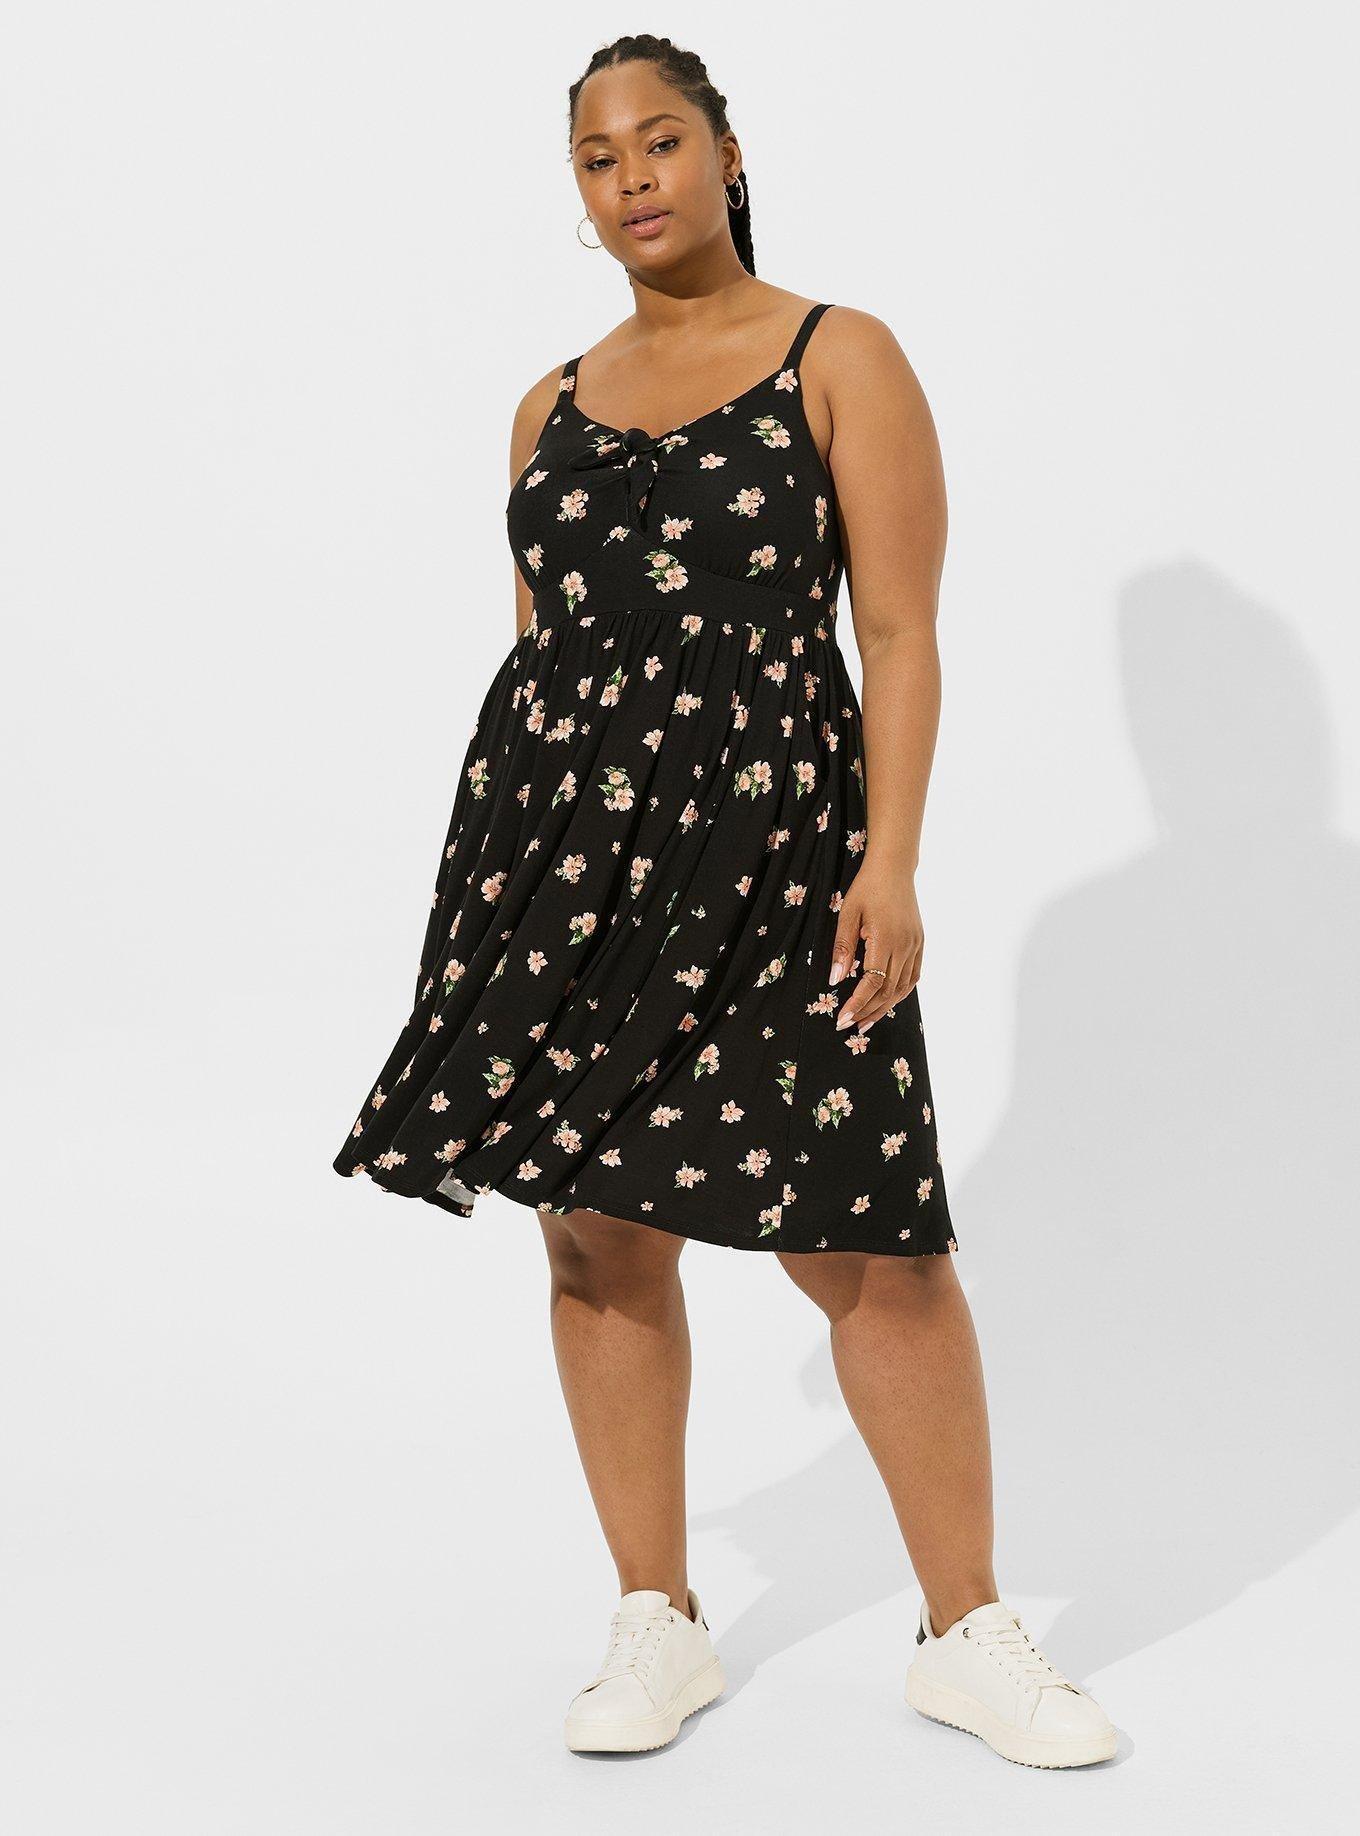 Plus Size Work Dresses for Women